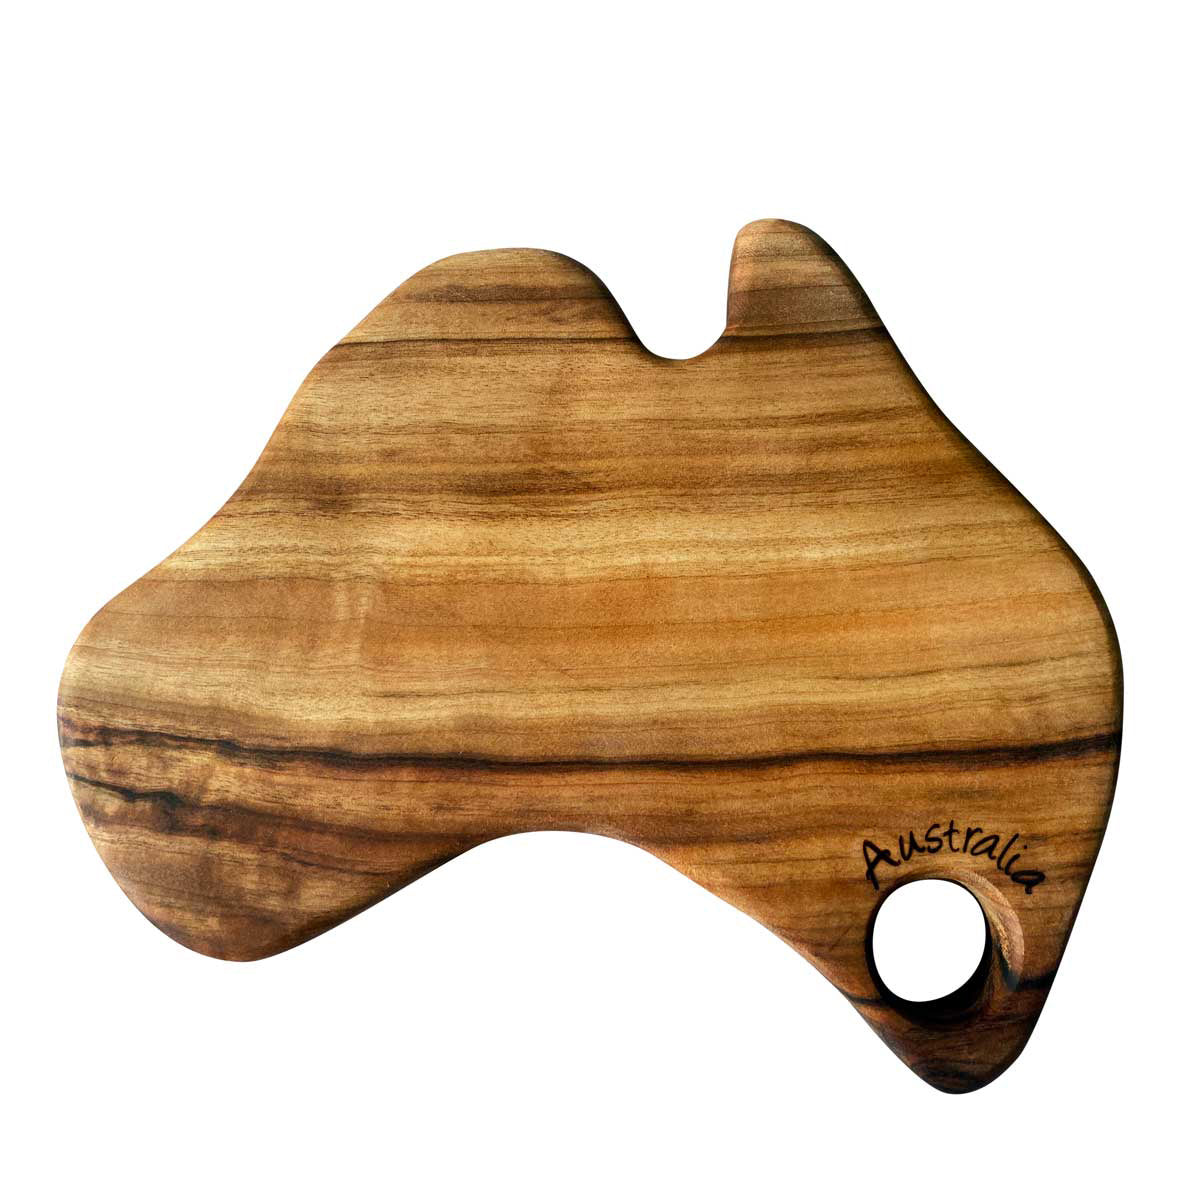 A large, Australian-shaped wood cutting board or cheese platter made from camphor laurel timber by Nature's Boards.